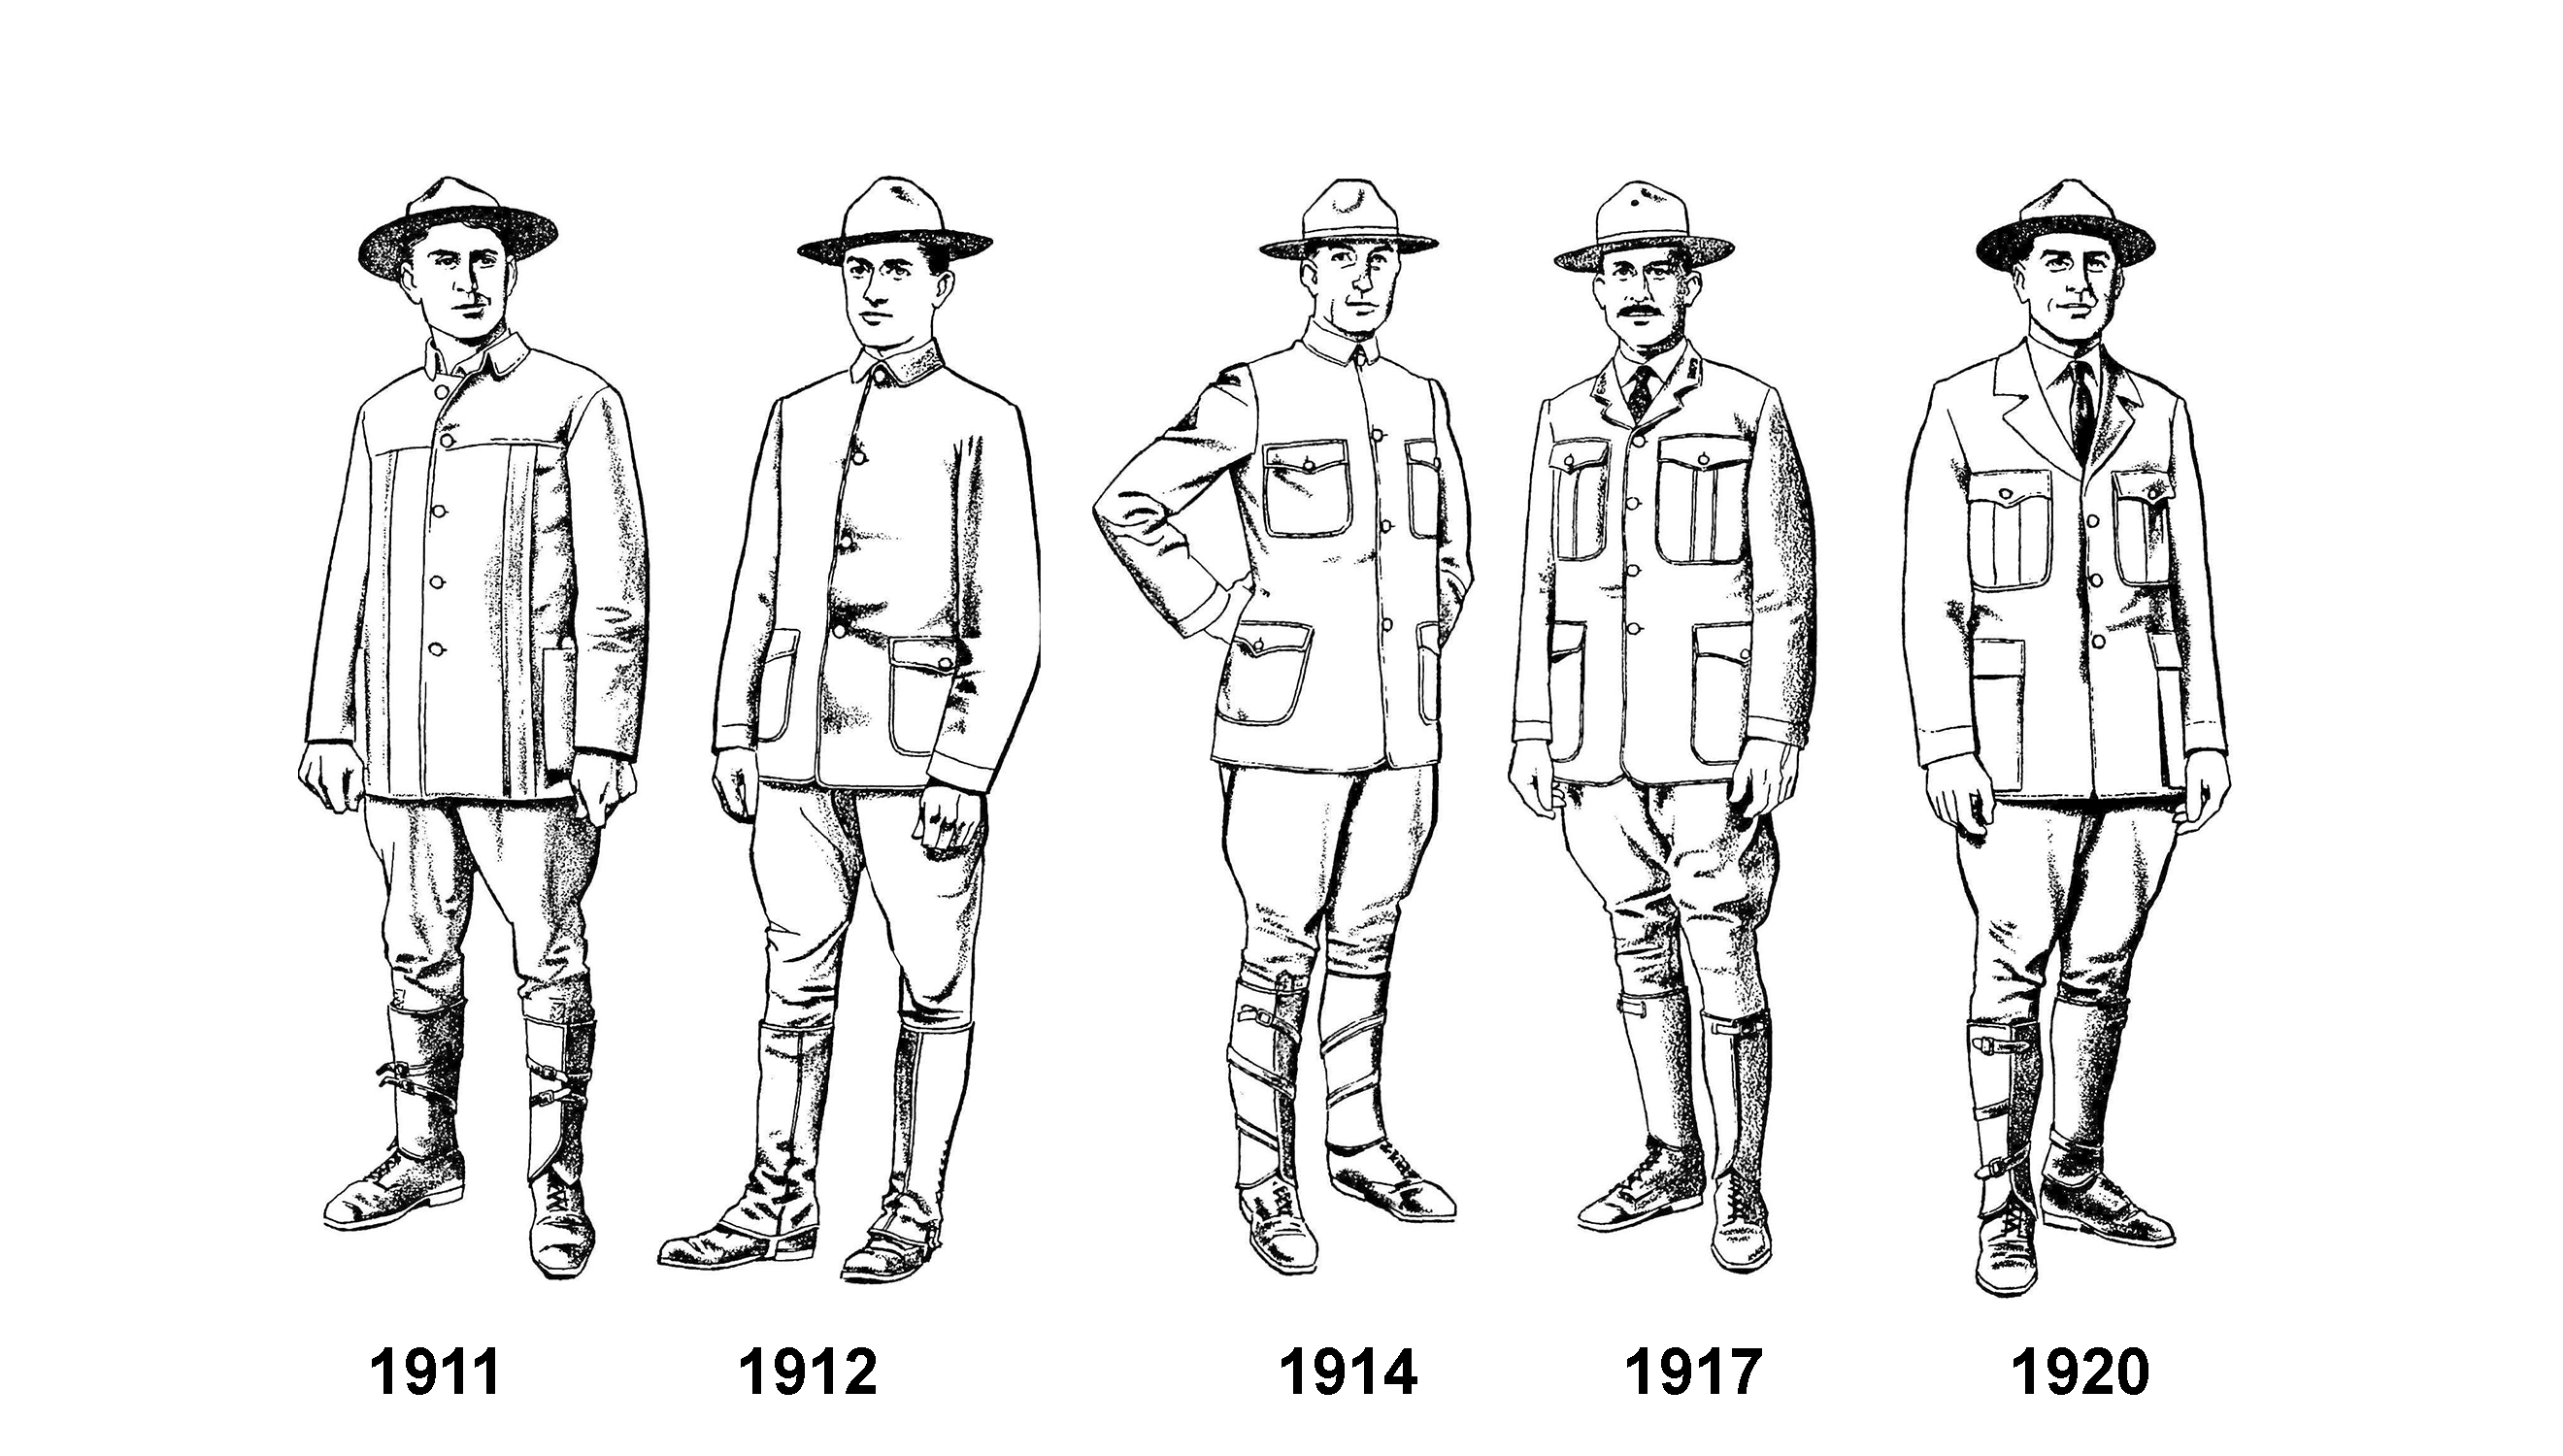 Drawing of 5 men park rangers showing the evolution of the uniform from 1911 to 1920